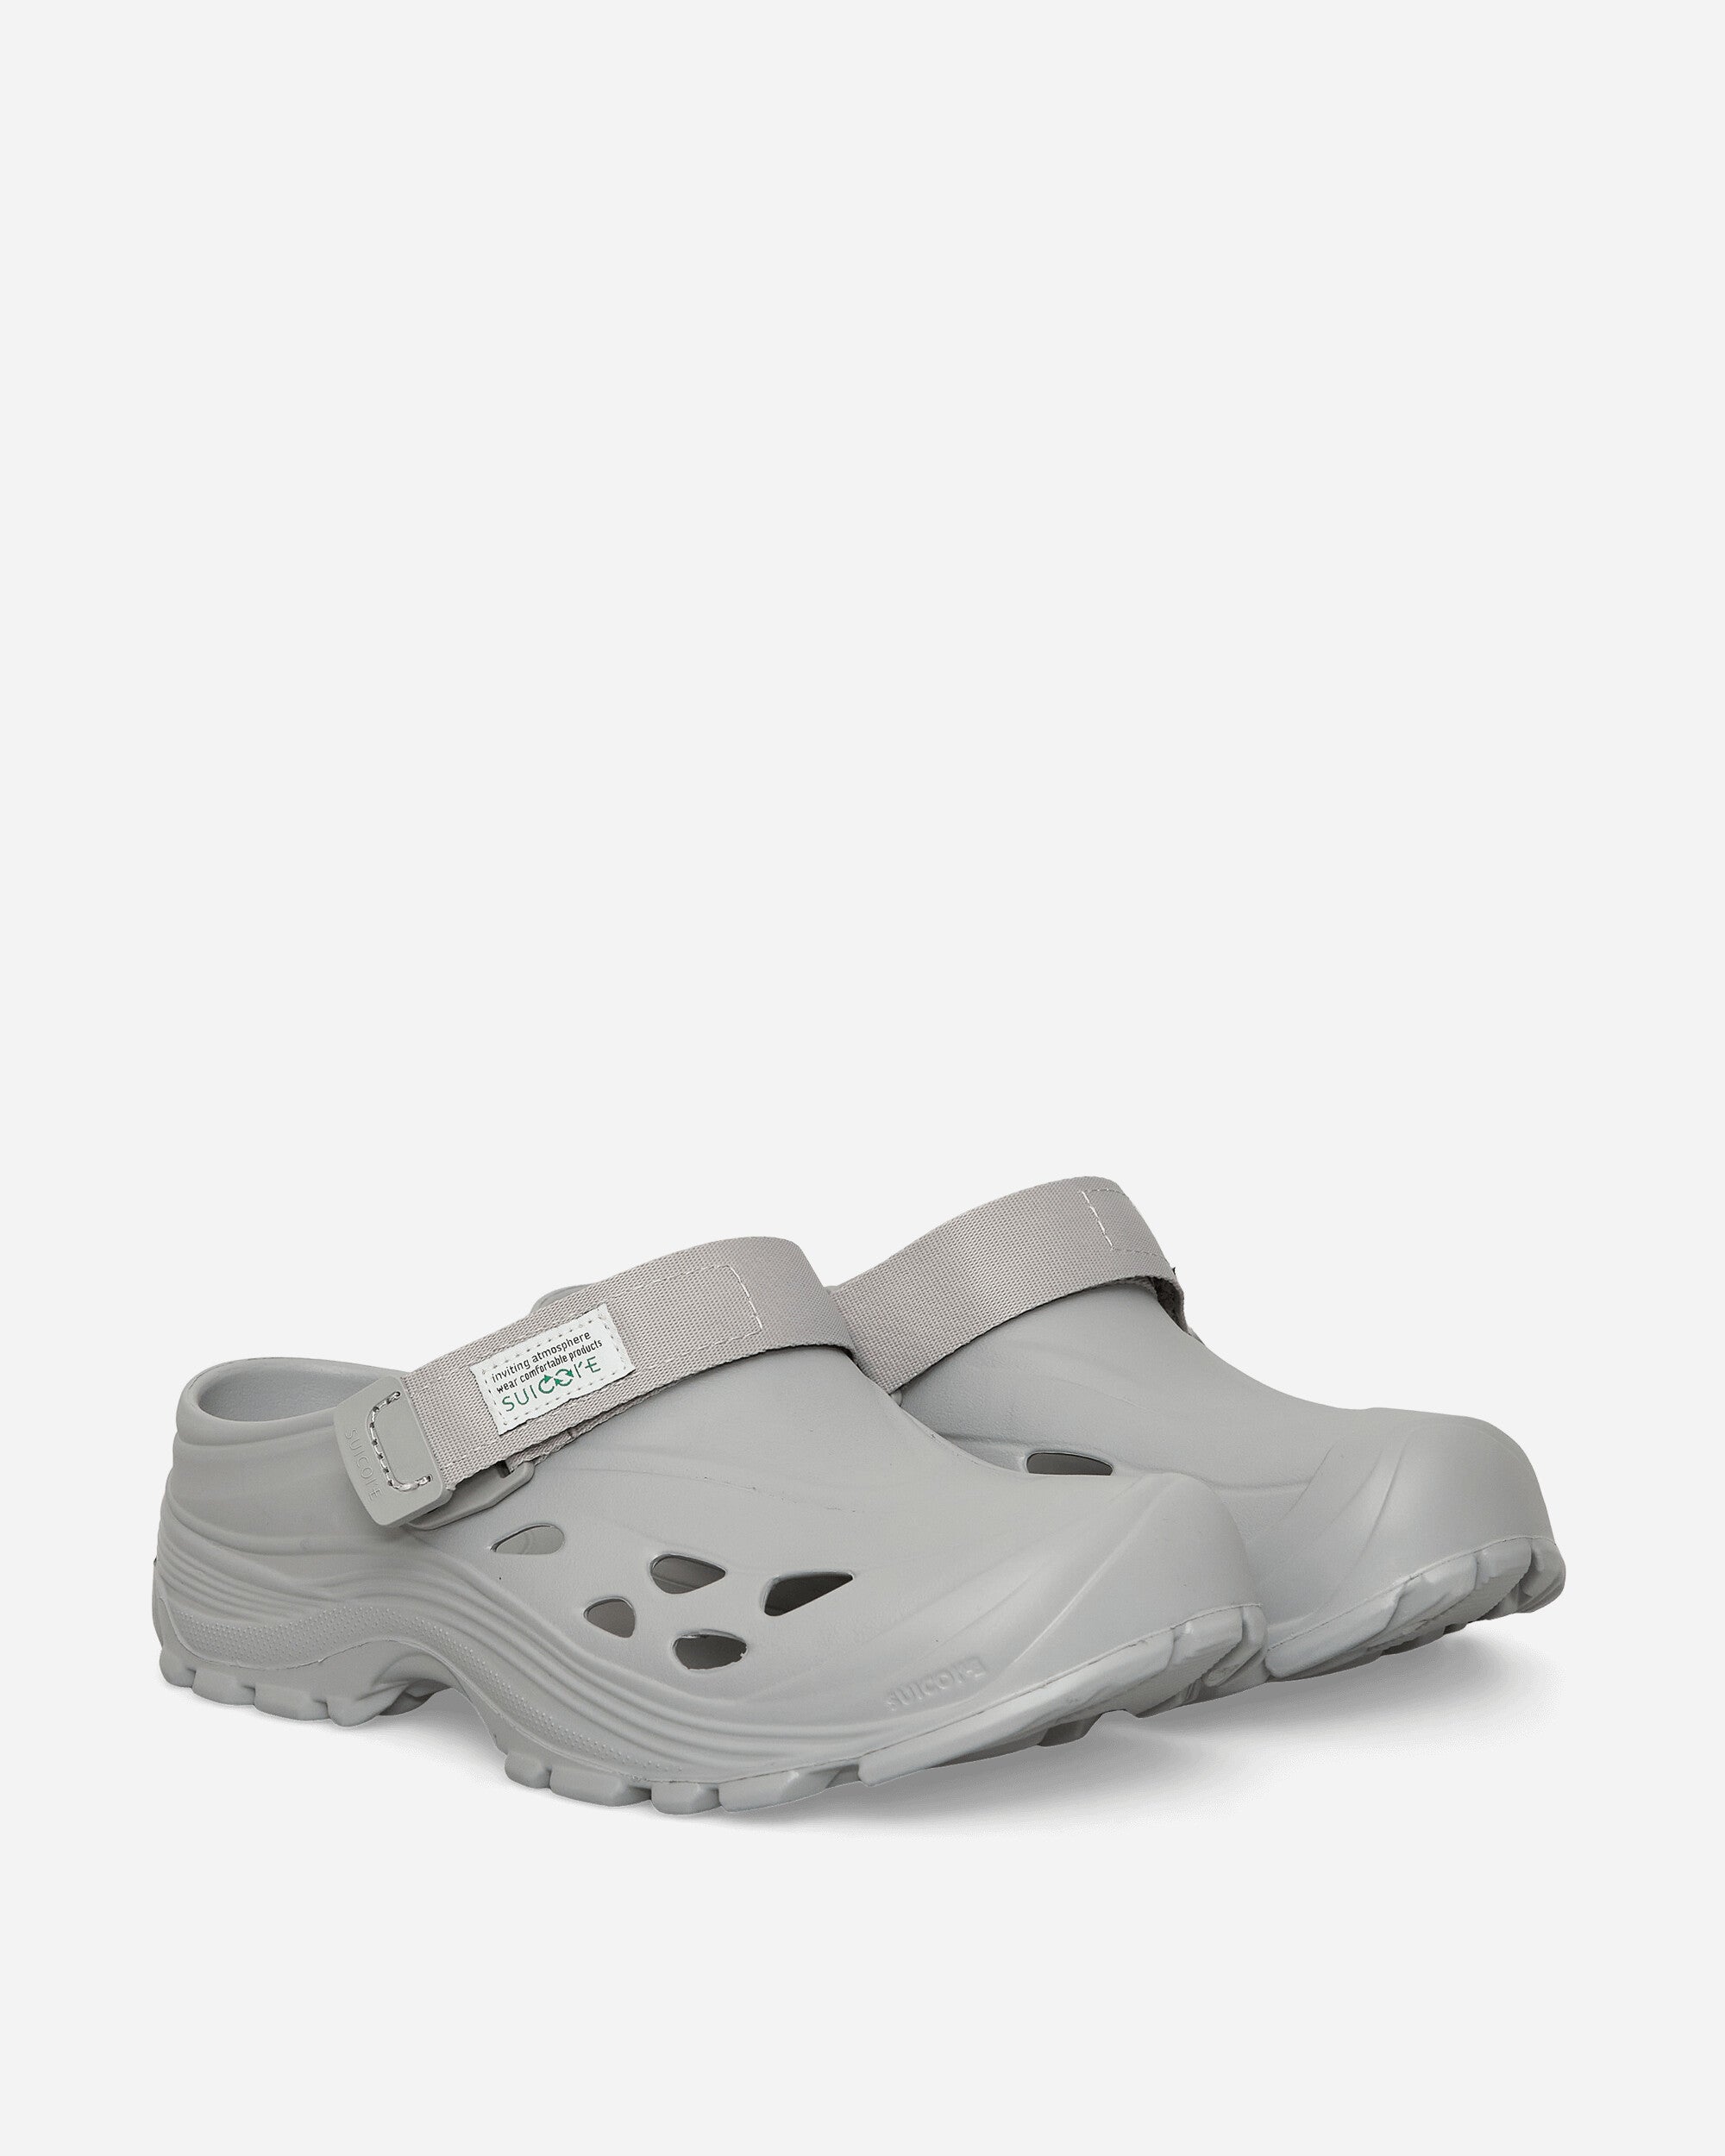 Suicoke Mok Gray Sandals and Slides Sandals and Mules OGINJ101 GRY